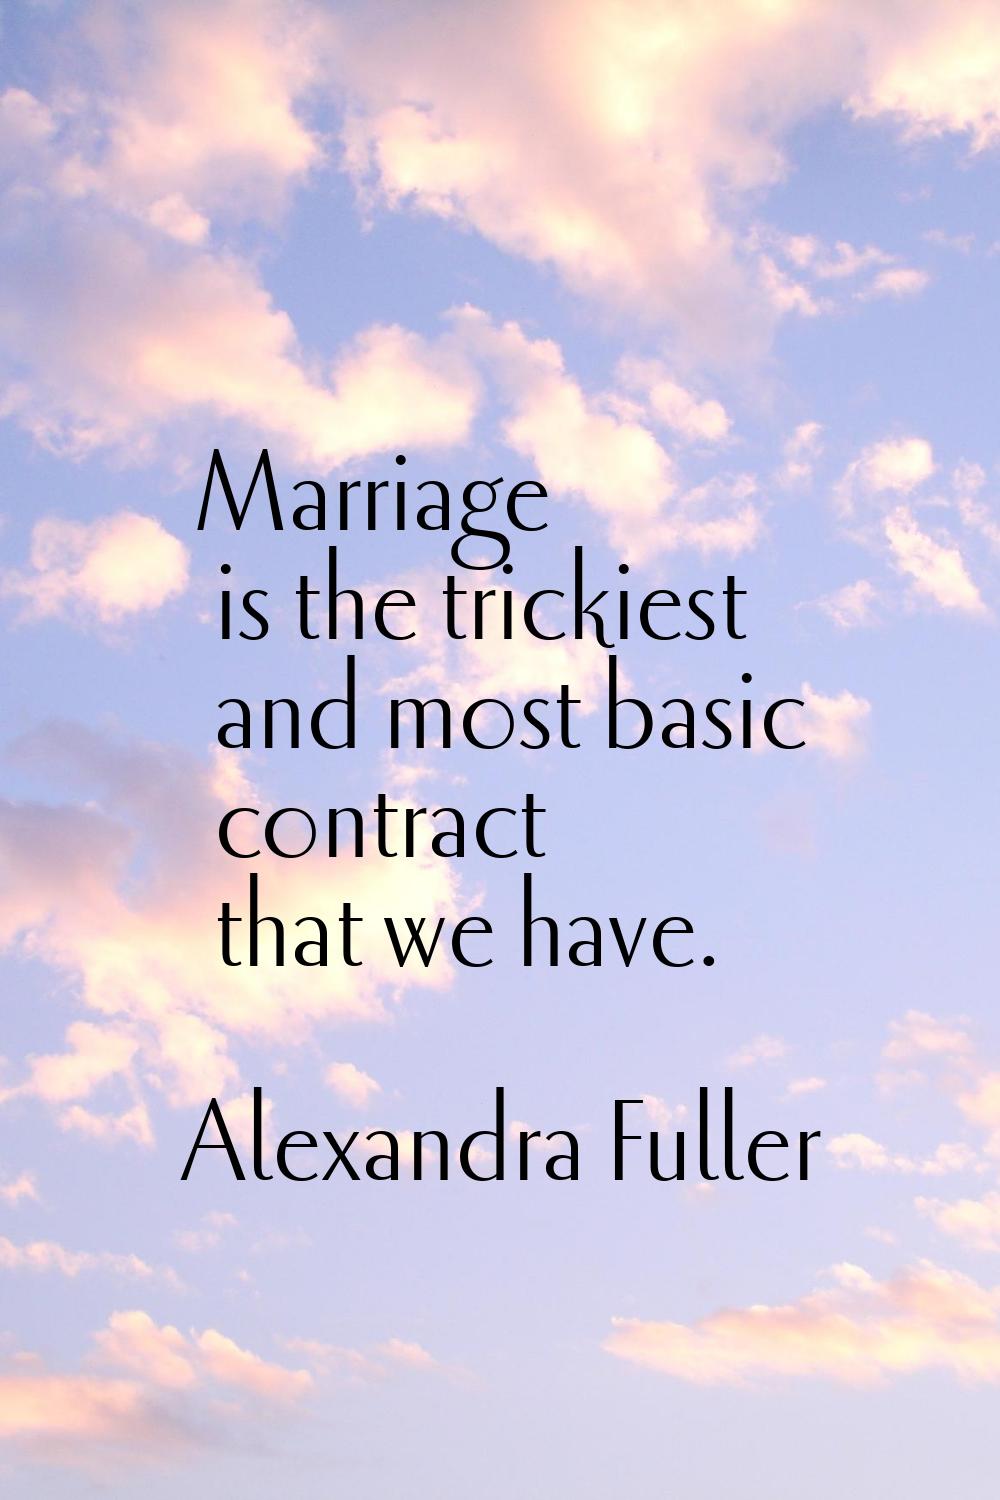 Marriage is the trickiest and most basic contract that we have.